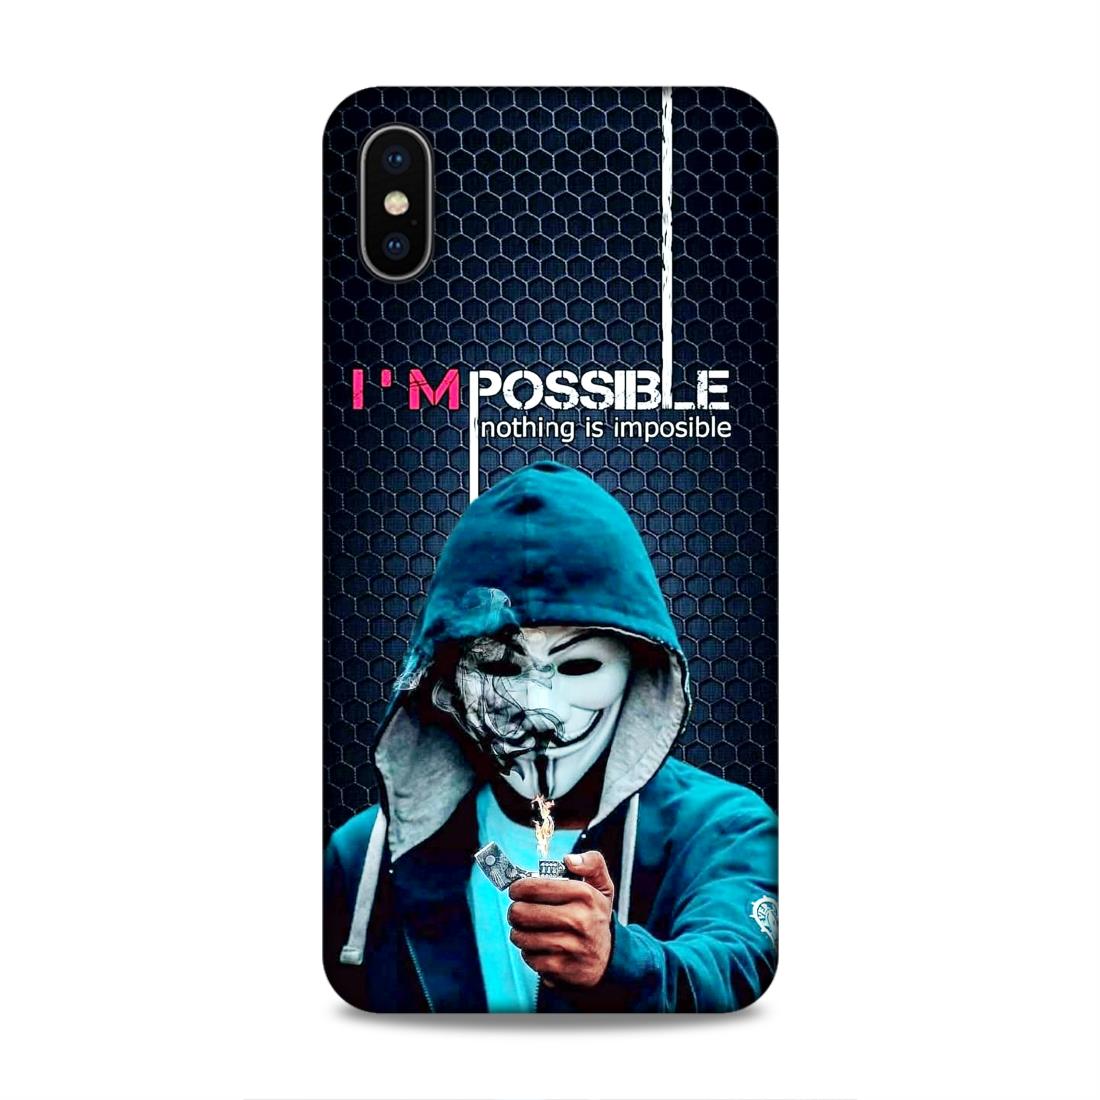 Im Possible Hard Back Case For Apple iPhone XS Max